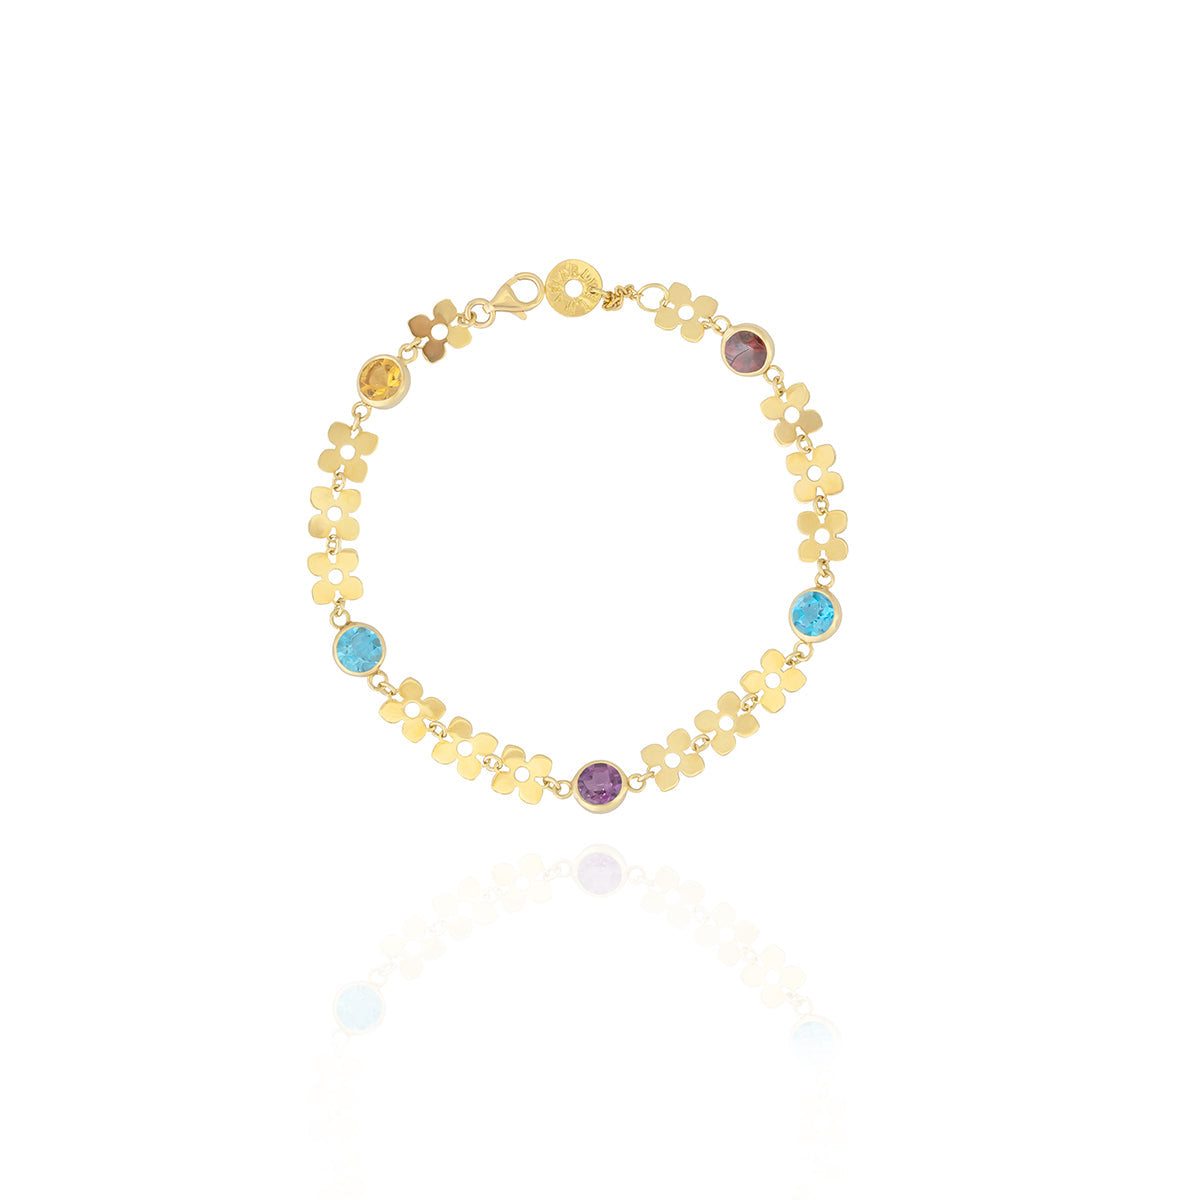 Colored Stones Bracelet in 18k Yellow Gold